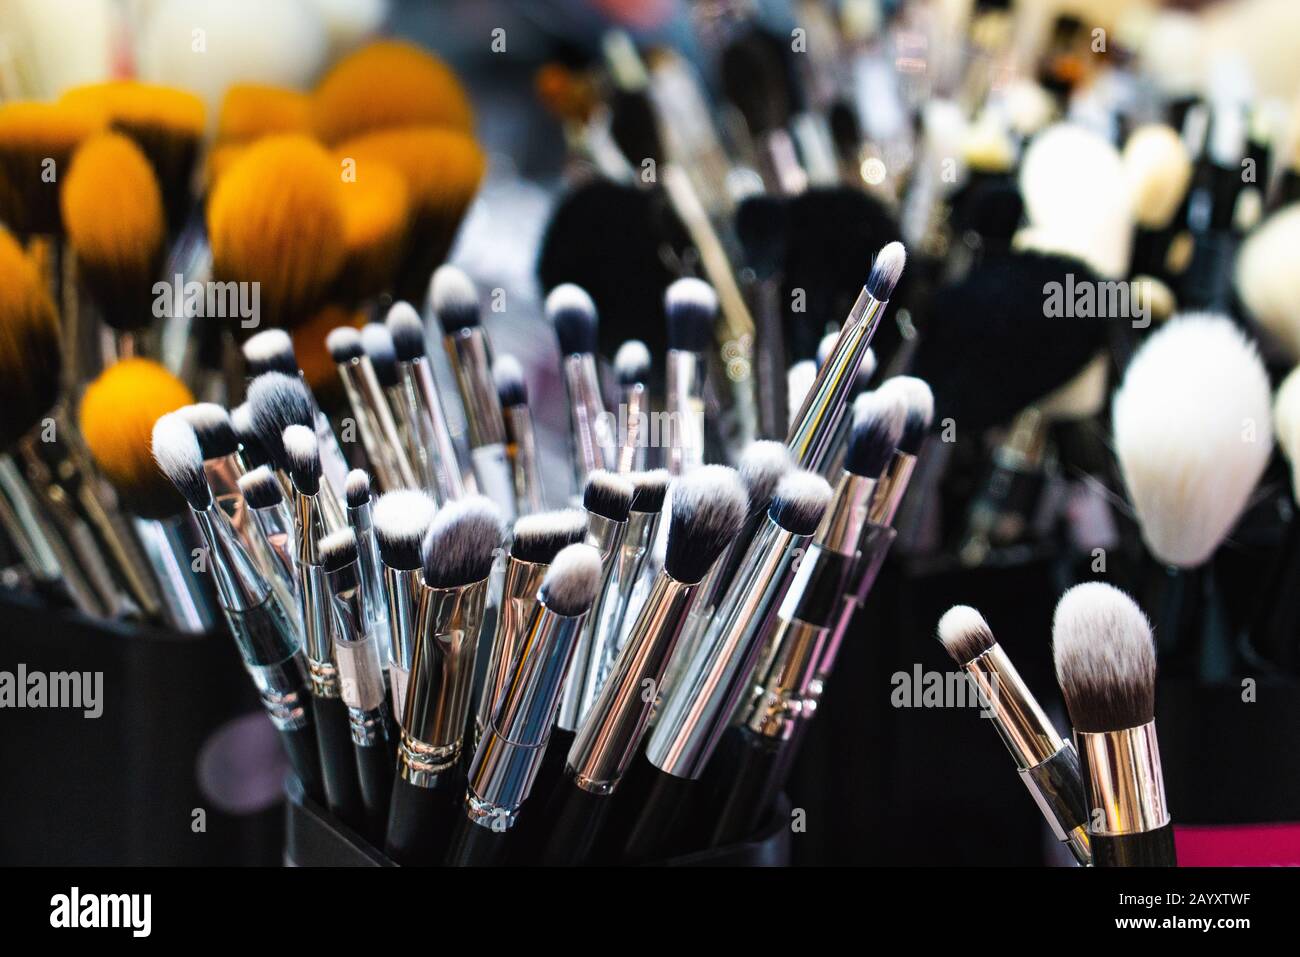 A collection of natural wool brushes for applying cosmetics, close-up. Stock Photo